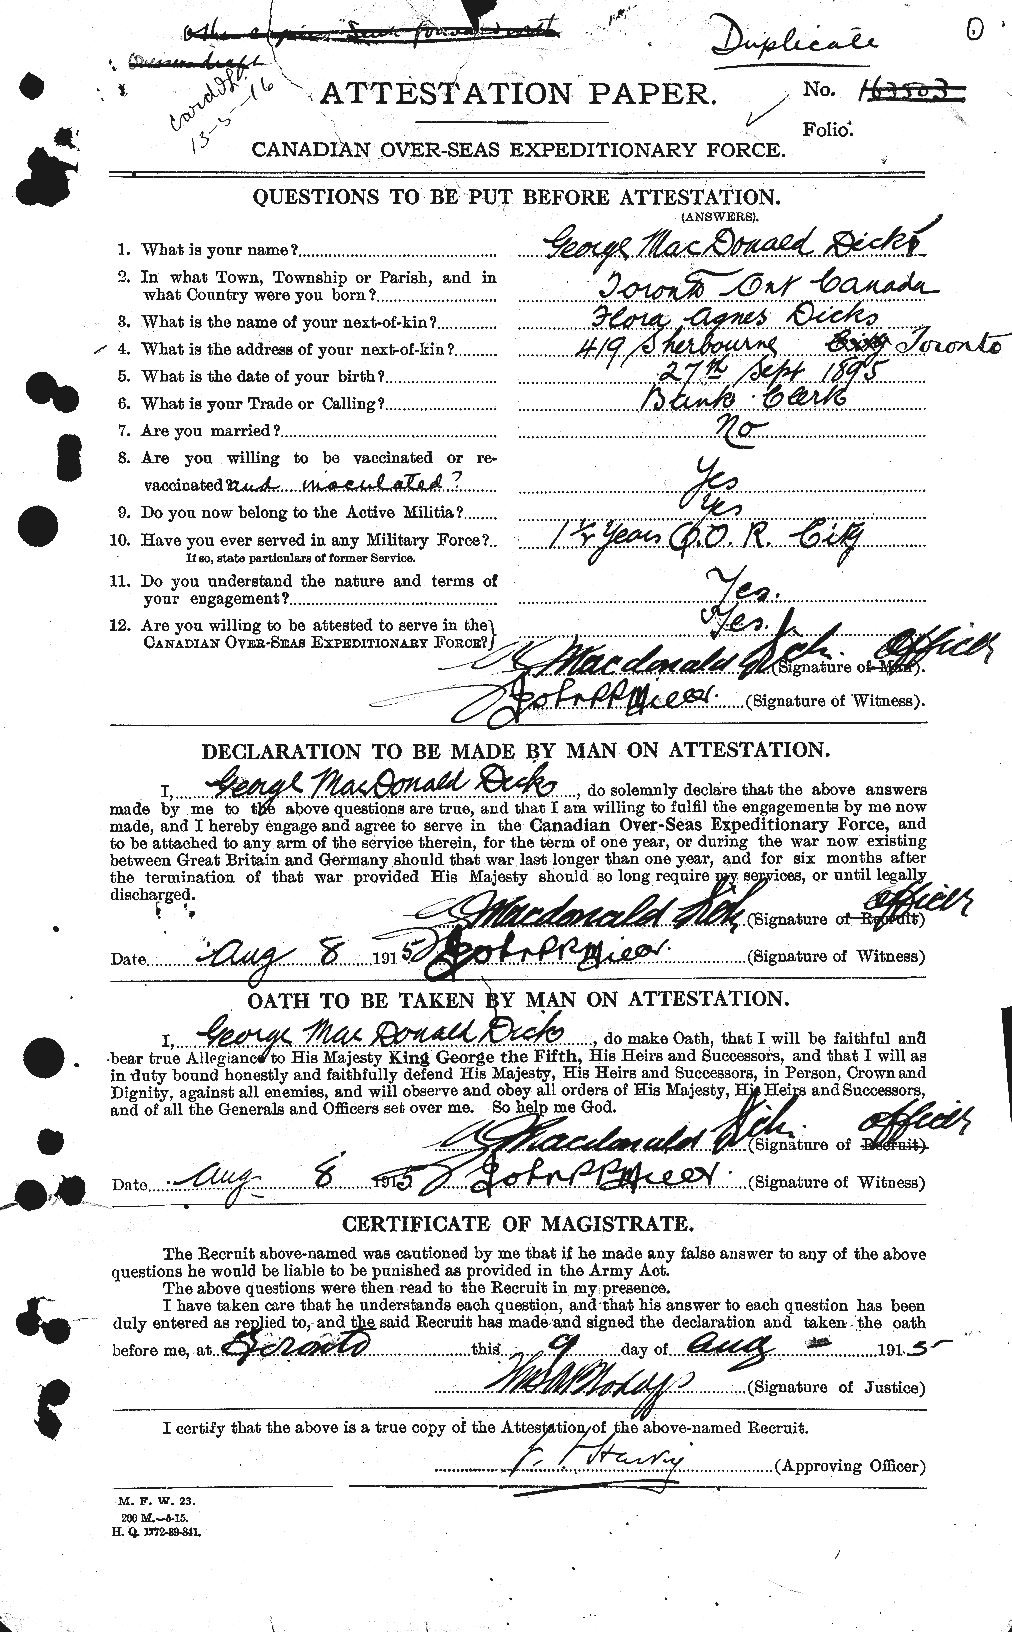 Personnel Records of the First World War - CEF 290477a